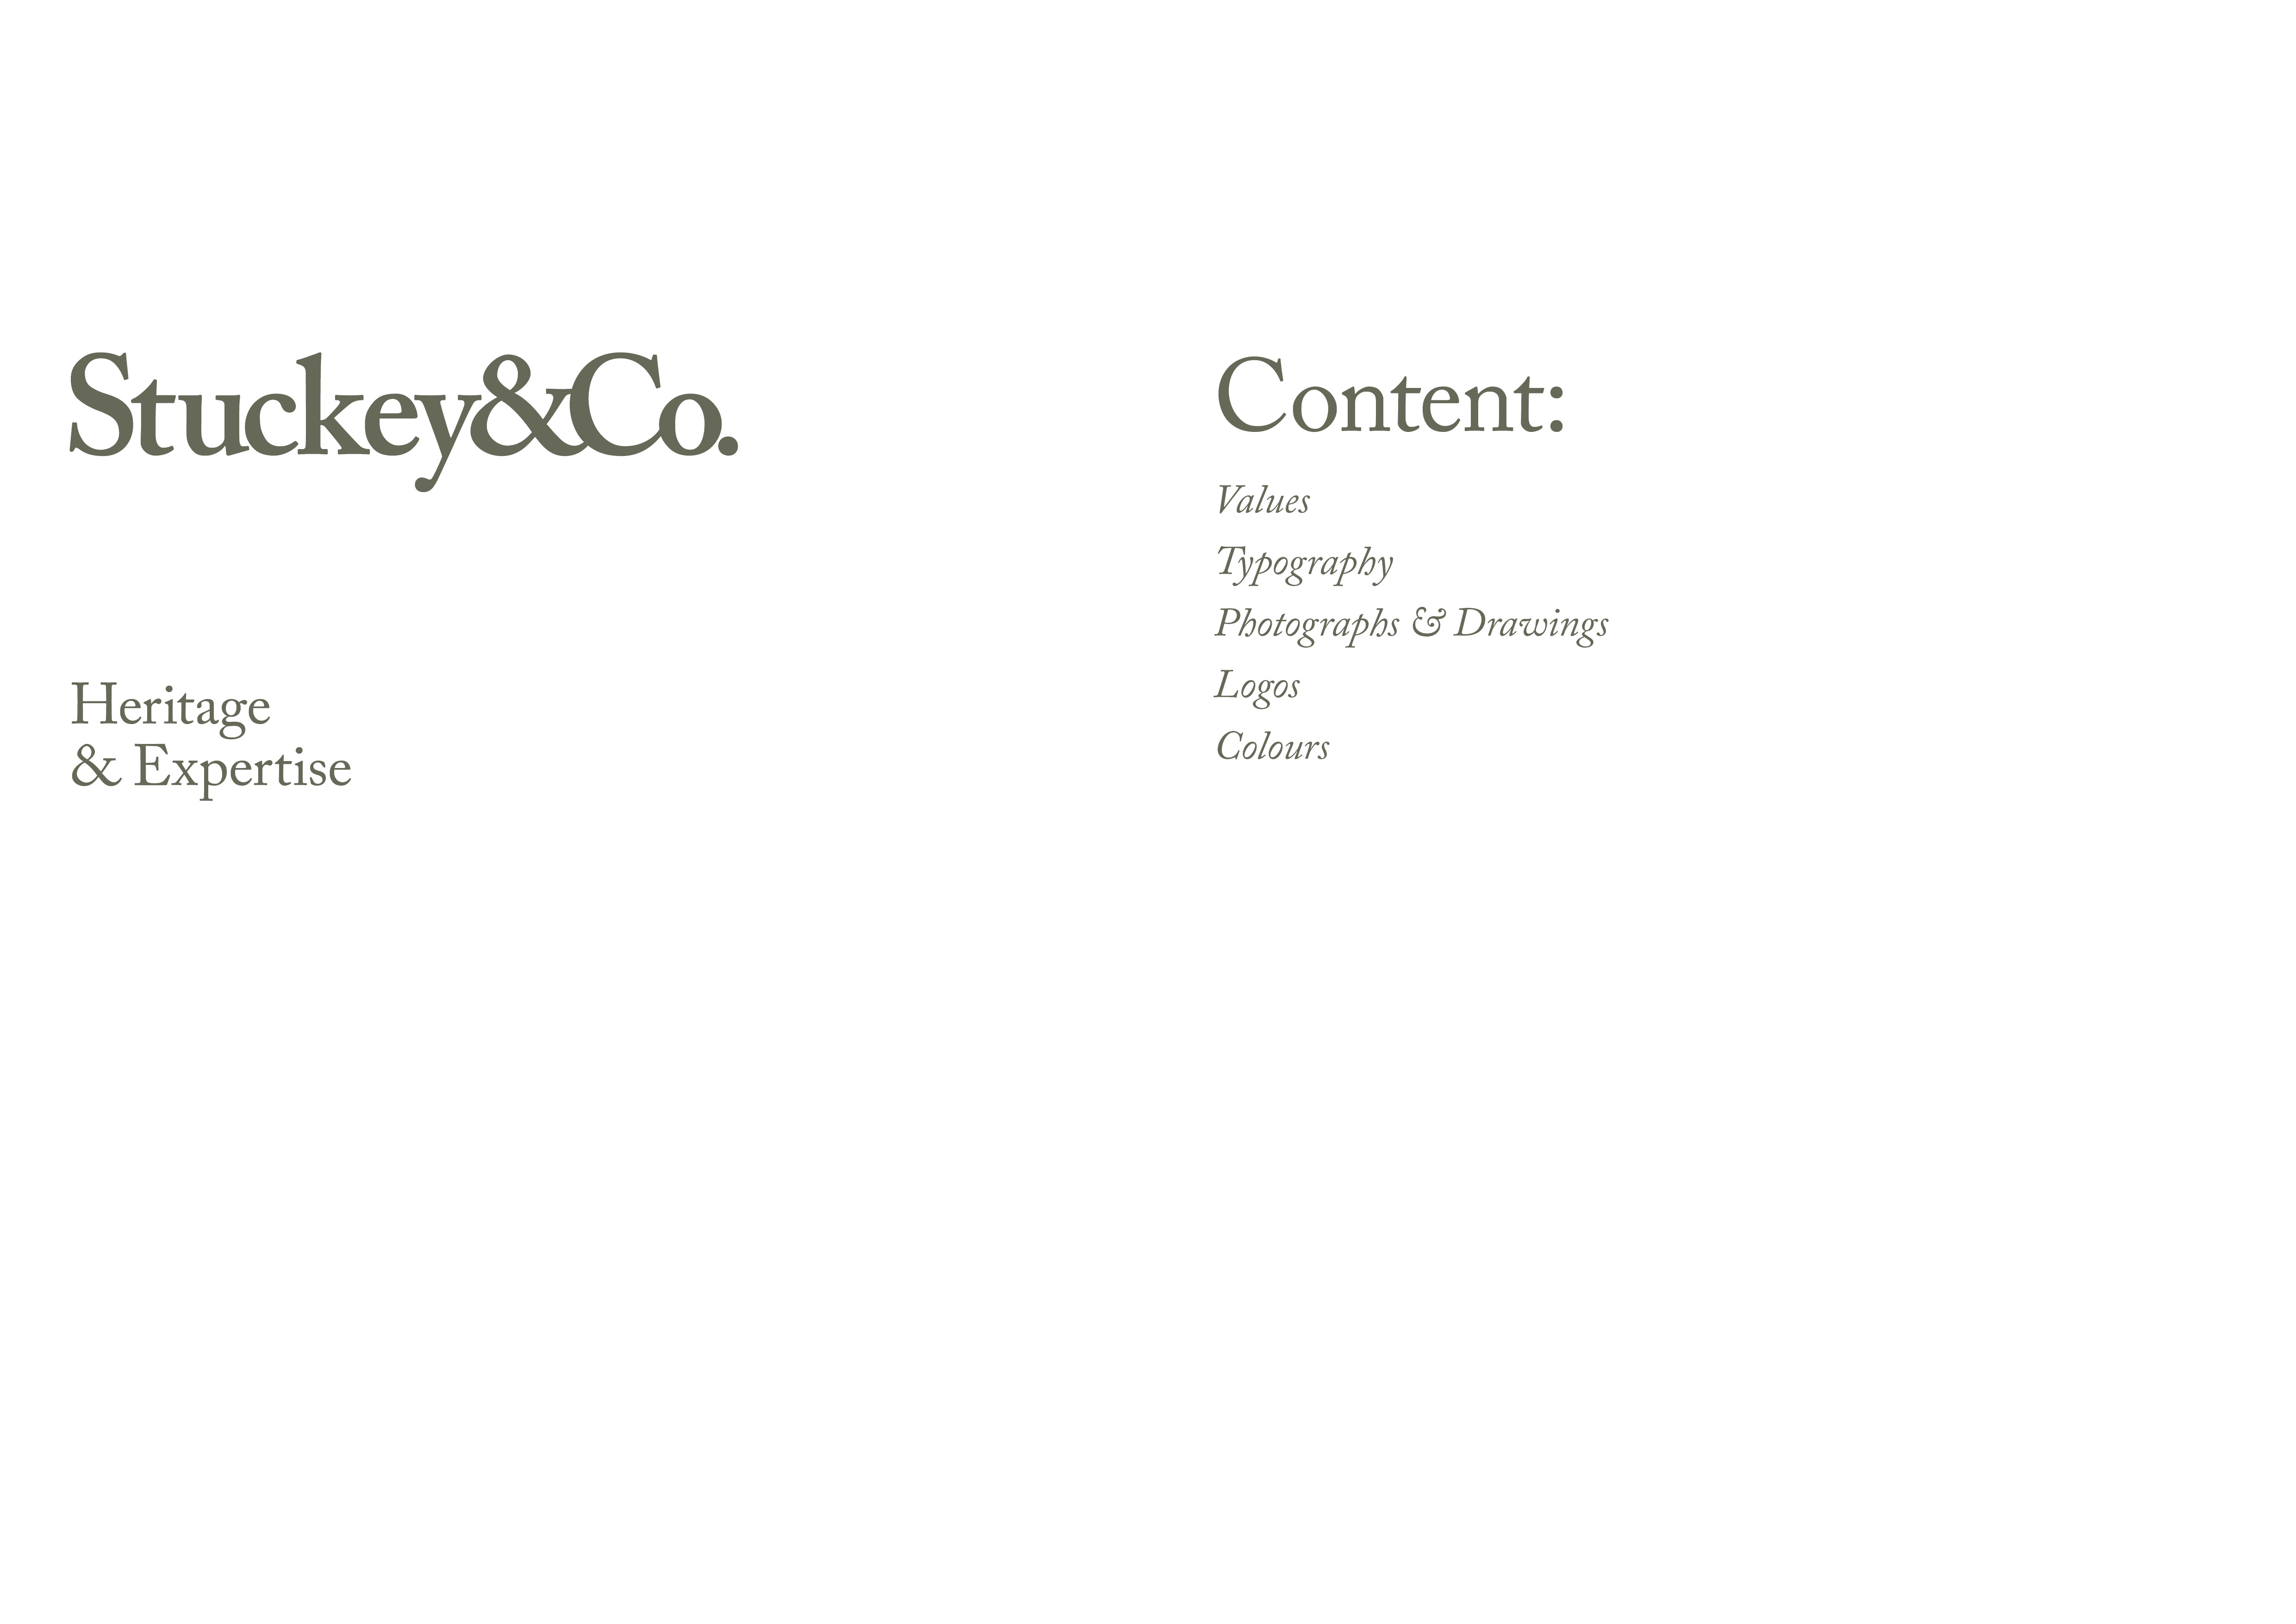 Values and contents from brand identity guidelines.